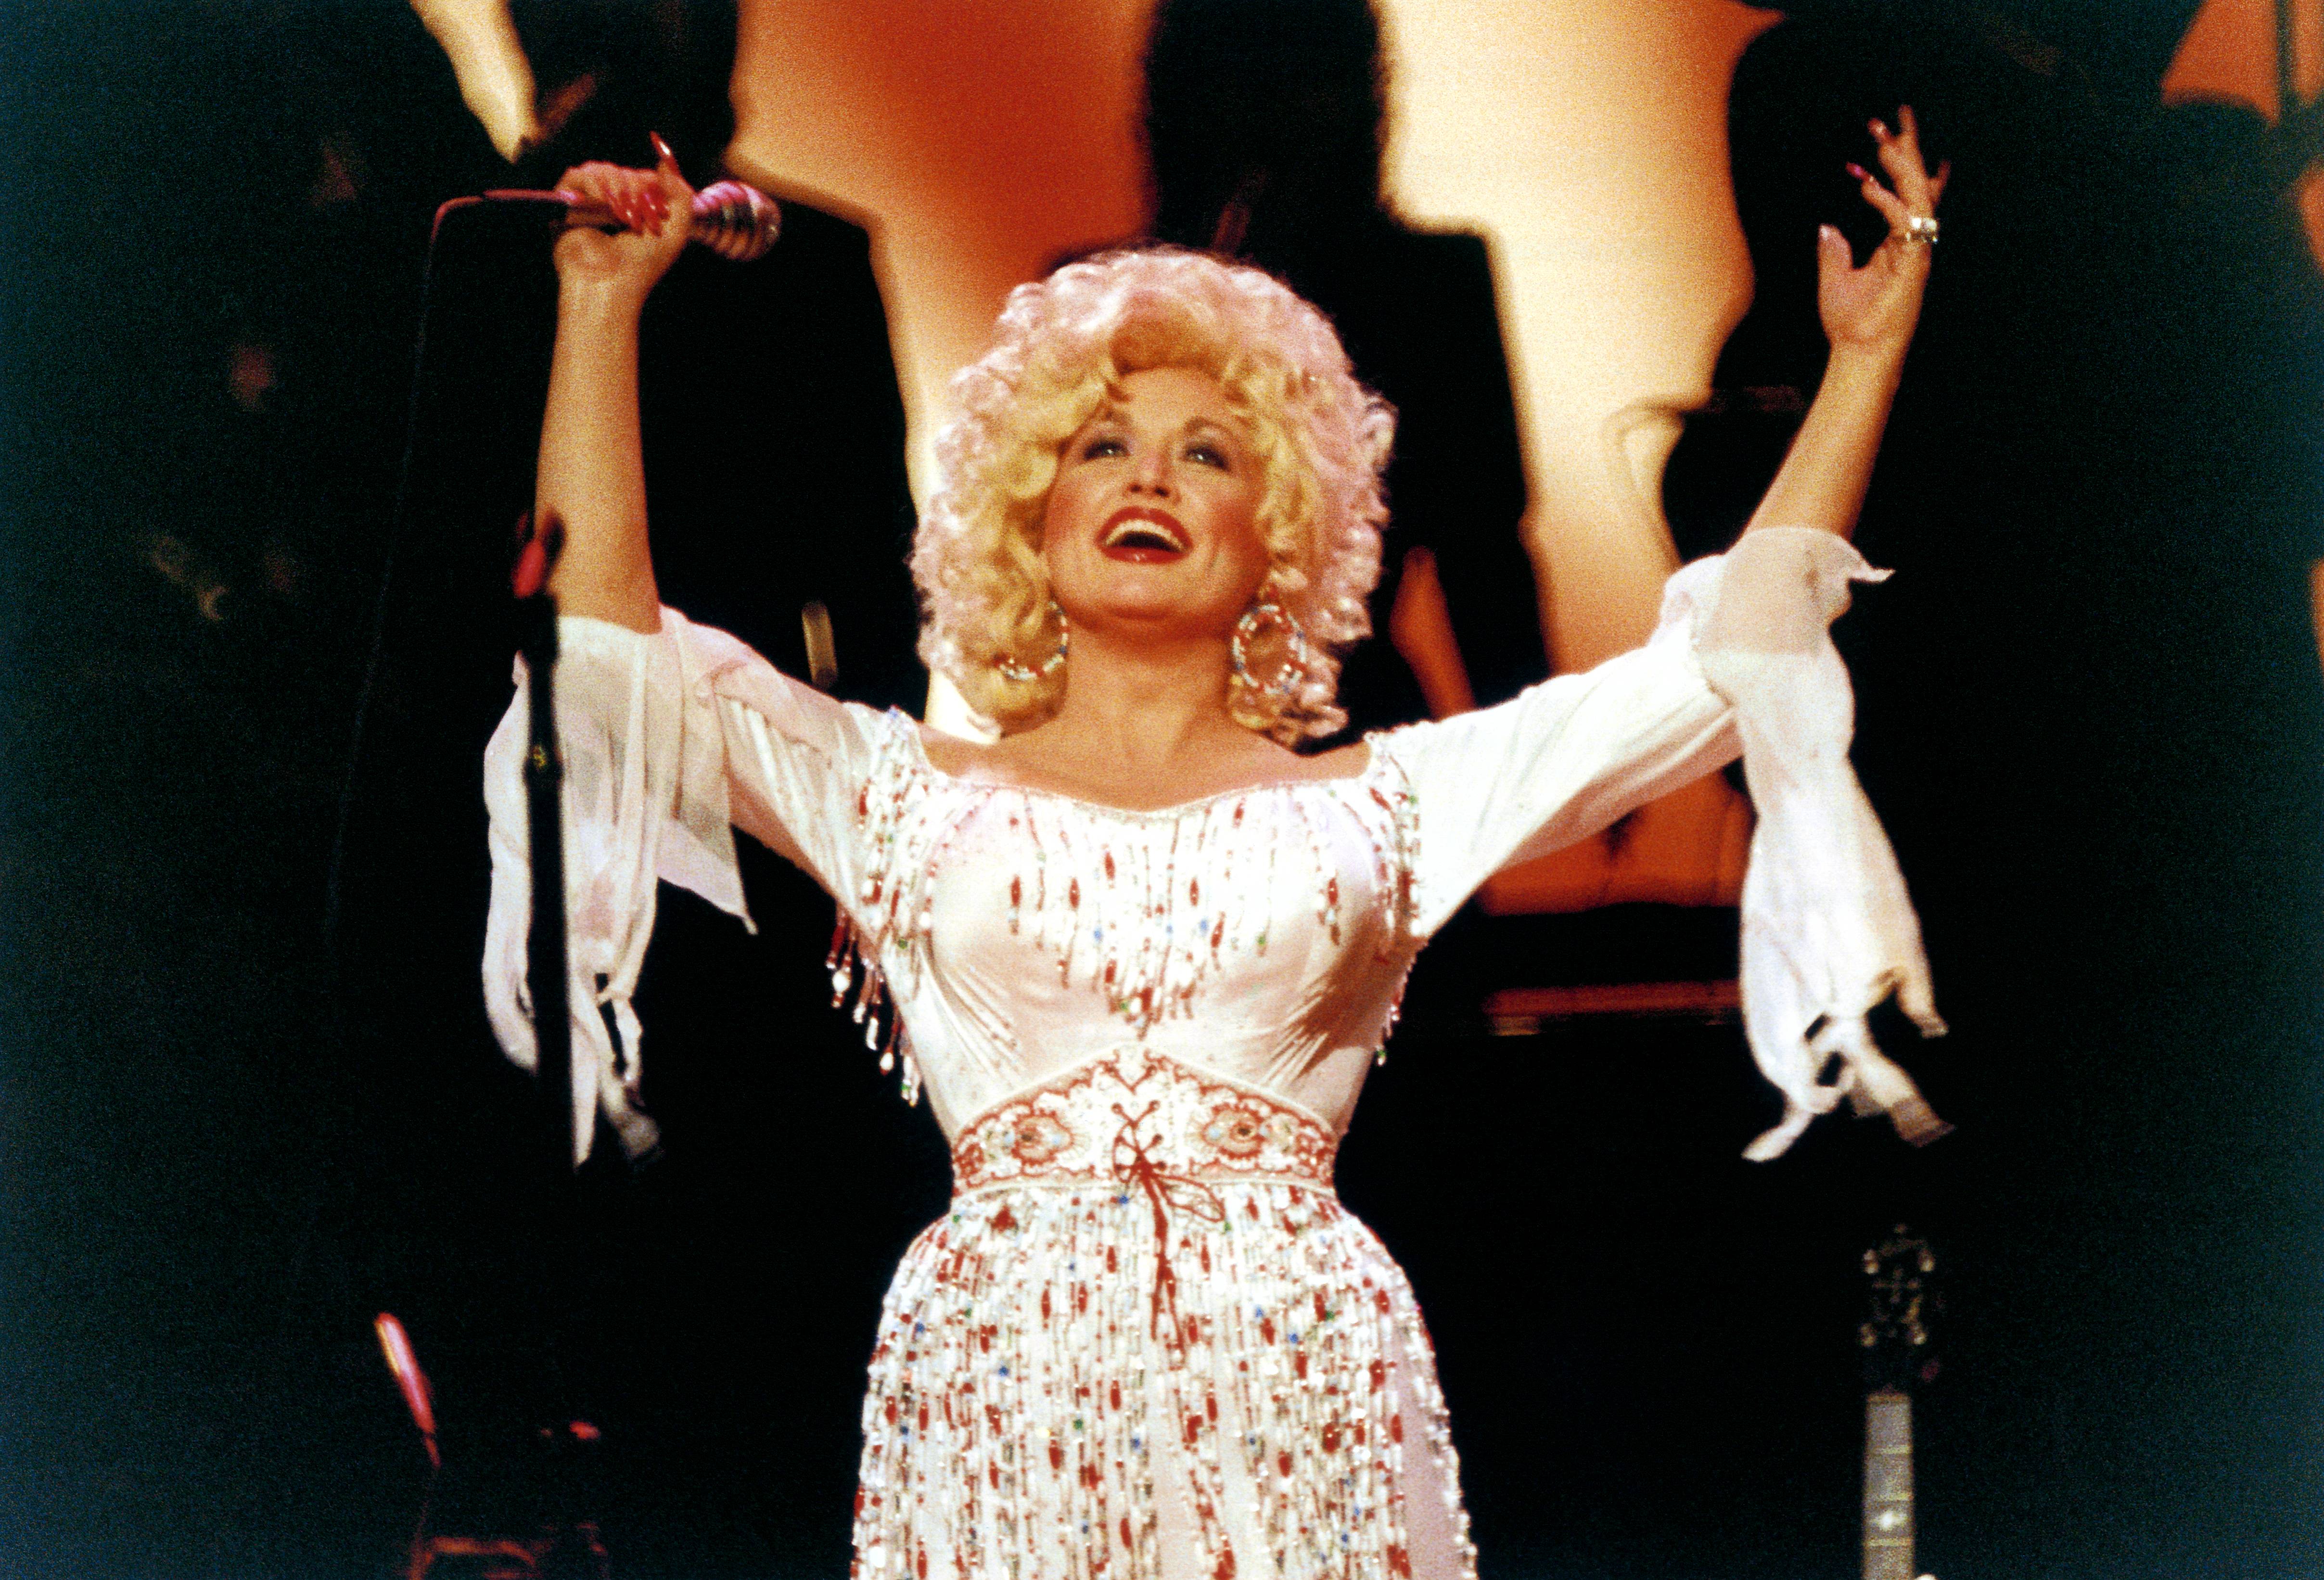 Dolly Parton singing on stage.